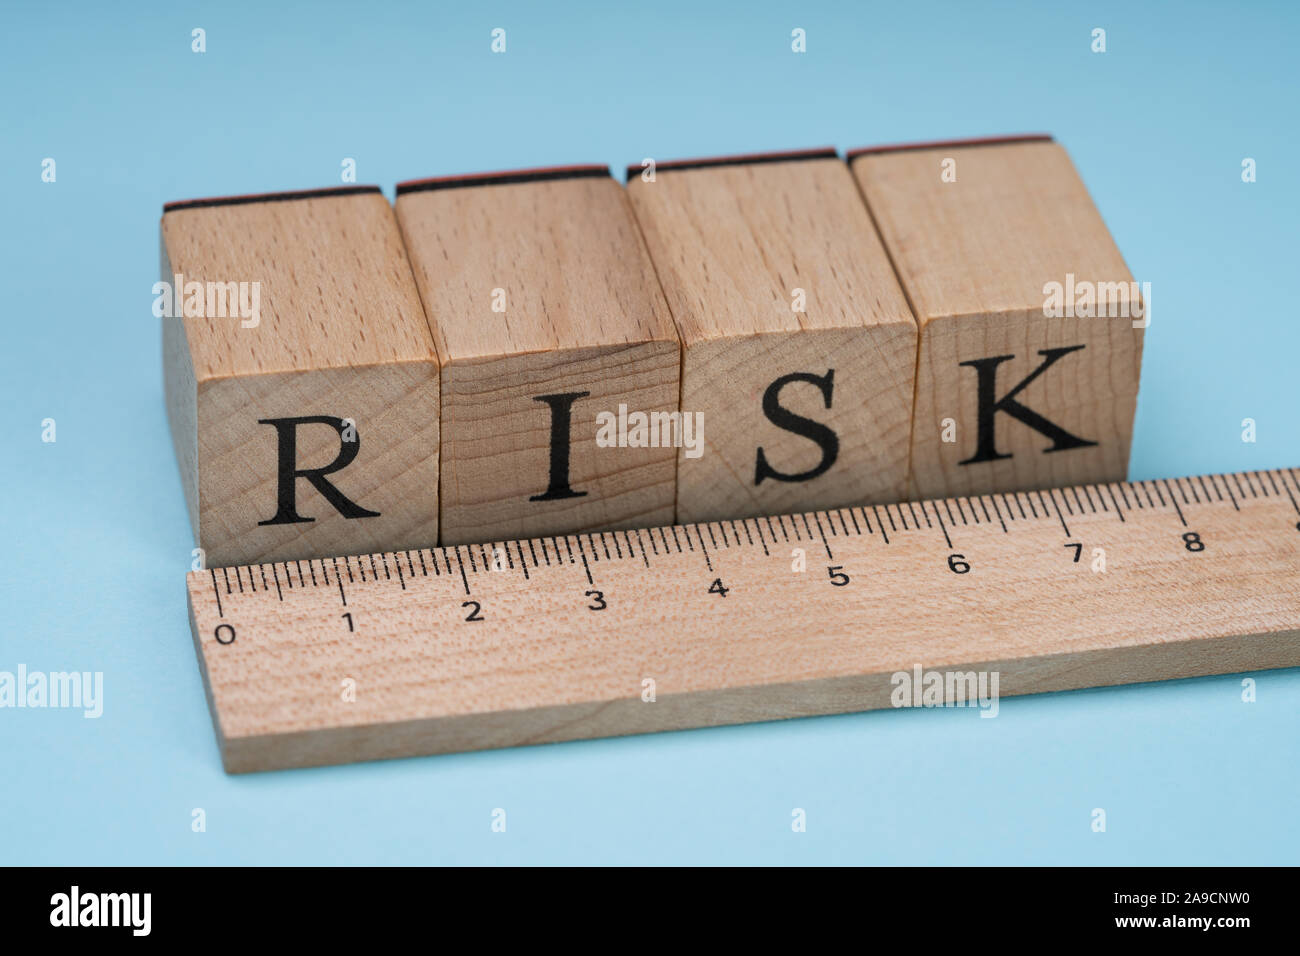 Close-up Of A Risk Word On Wooden Blocks Arranged Behind The Ruler On Blue Background Stock Photo